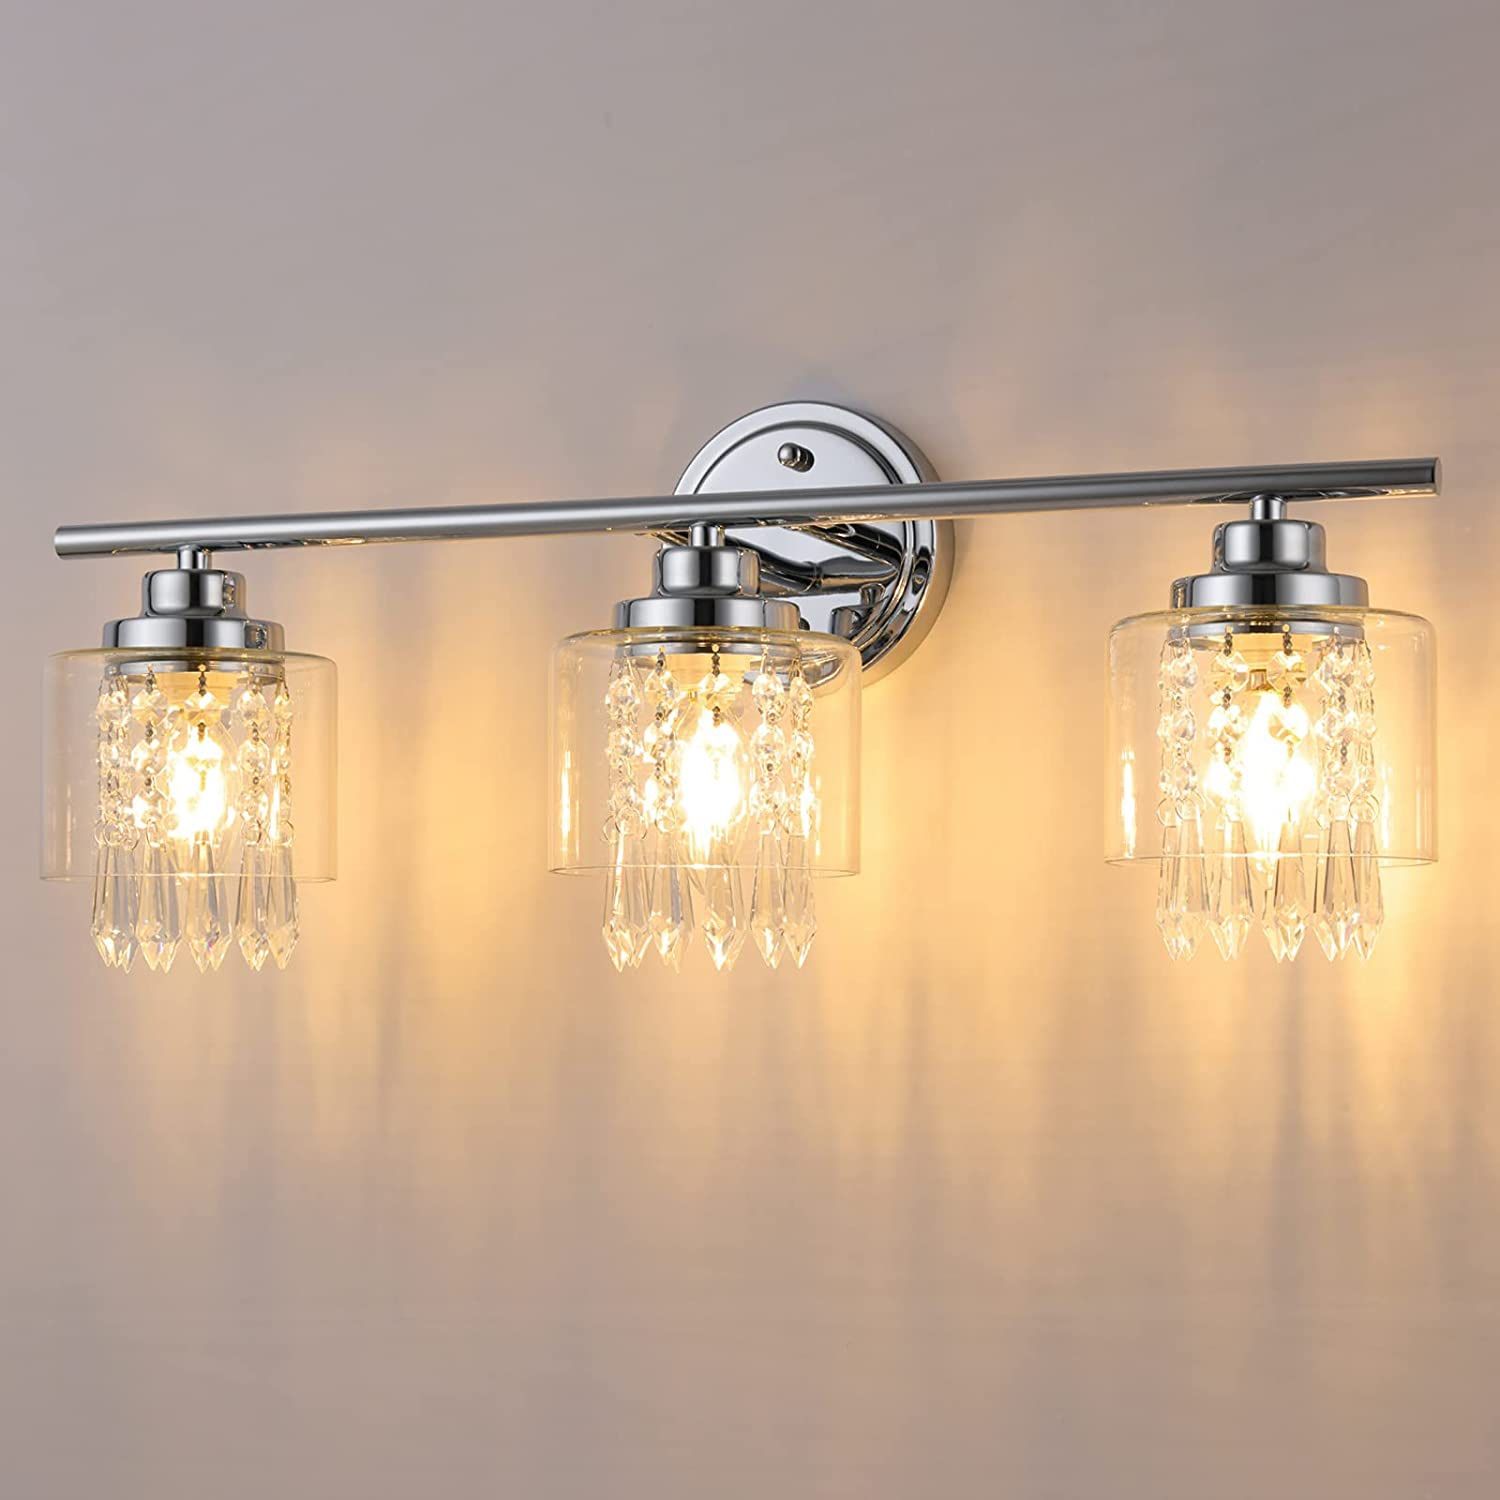 Bathroom Vanity Light Fixtures, 3-Light Crystal Wall Sconces with Clear Glass Shade, Wall Lamp for Mirror Bedroom Hallway